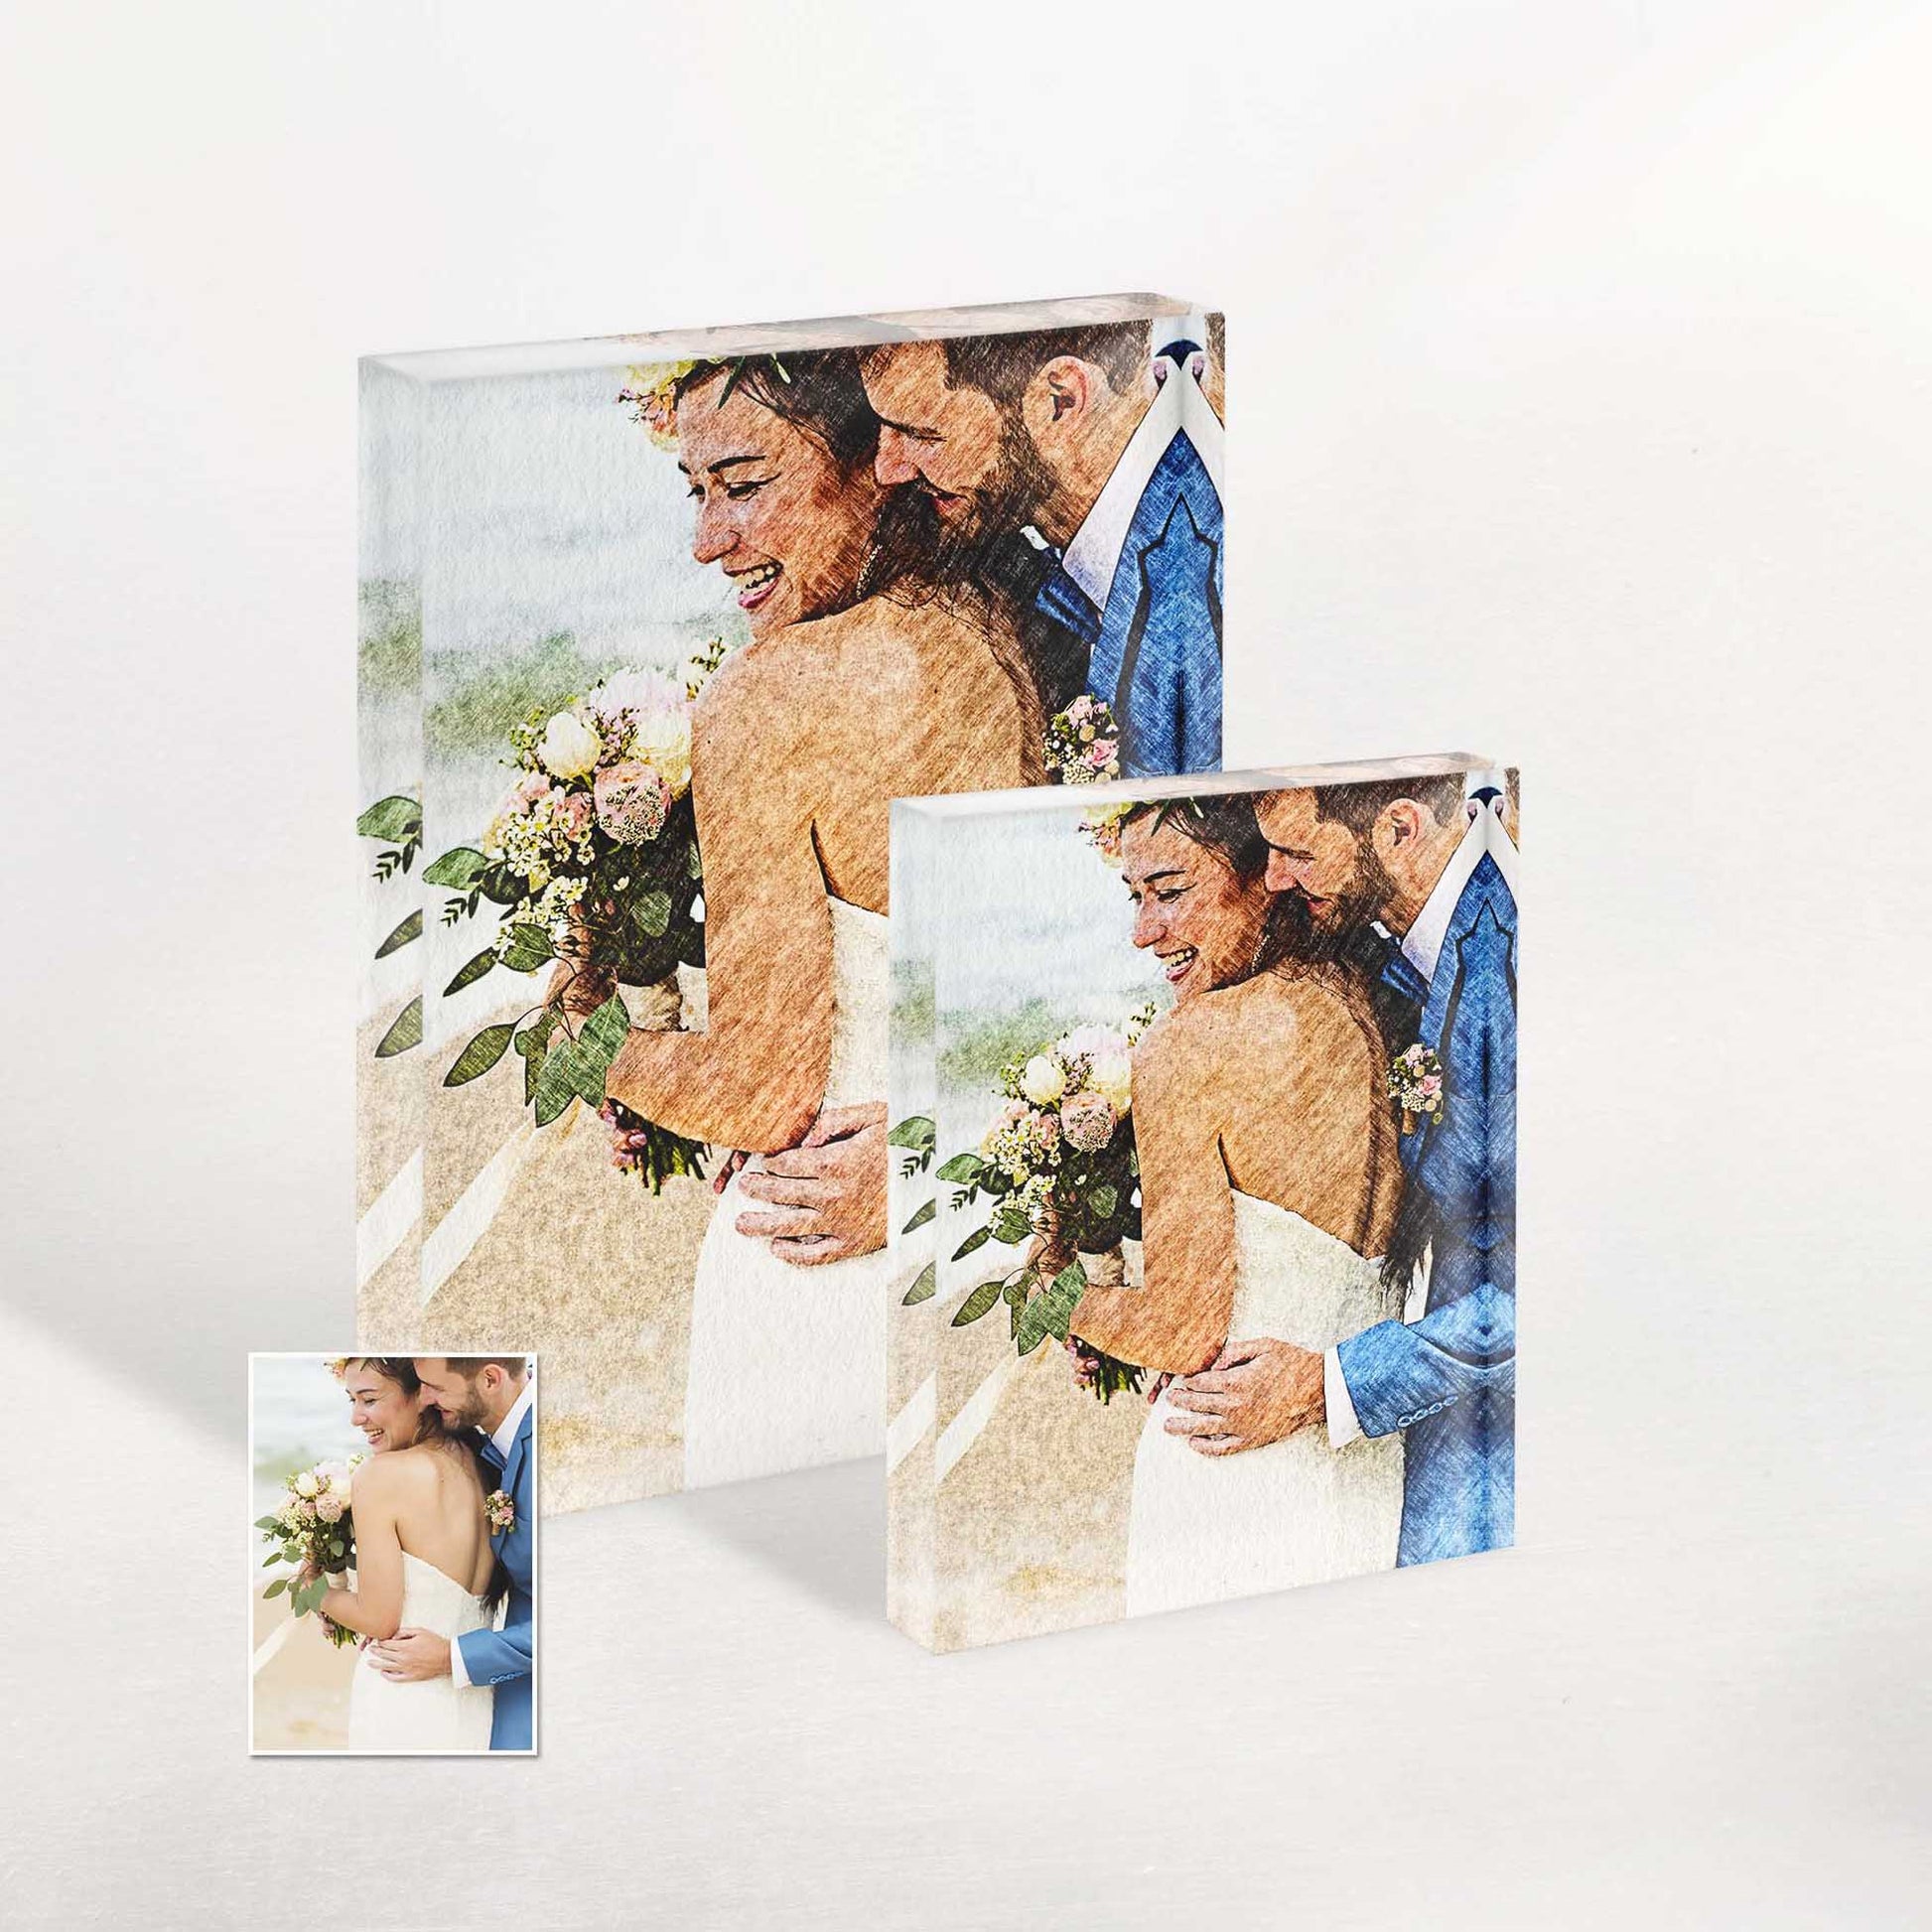 Celebrate love and special occasions with a personalised charcoal drawing acrylic block photo. Its stylish and timeless appeal brings an elegant and chic touch to any decor, making it an ideal choice for weddings, engagements, and anniversaries.